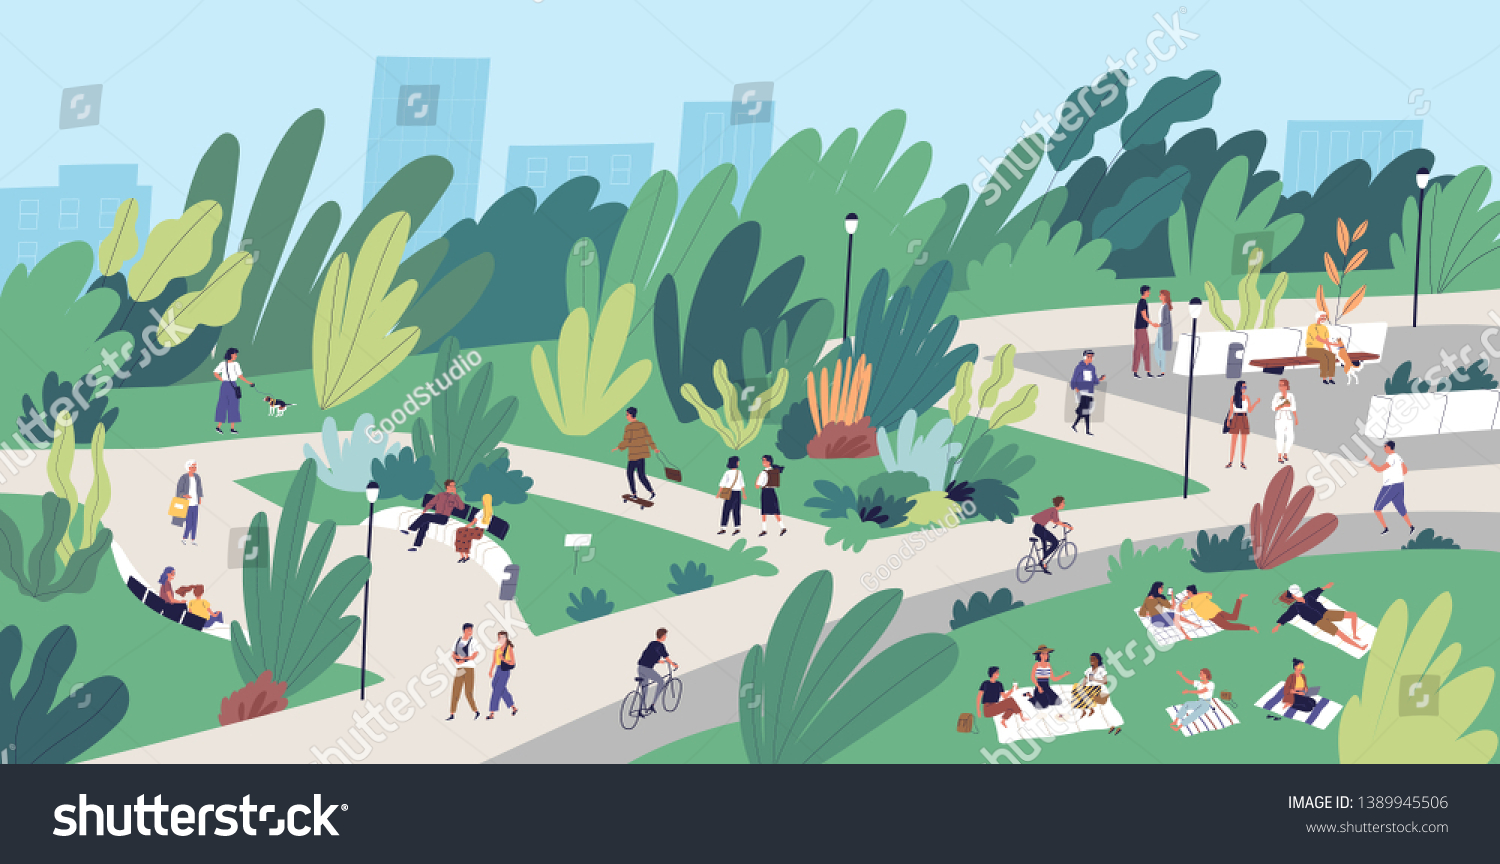 Landscape with people walking, playing, riding bicycle at city park. Urban recreation area with men and women performing leisure activities outdoors. Flat cartoon colorful vector illustration. #1389945506